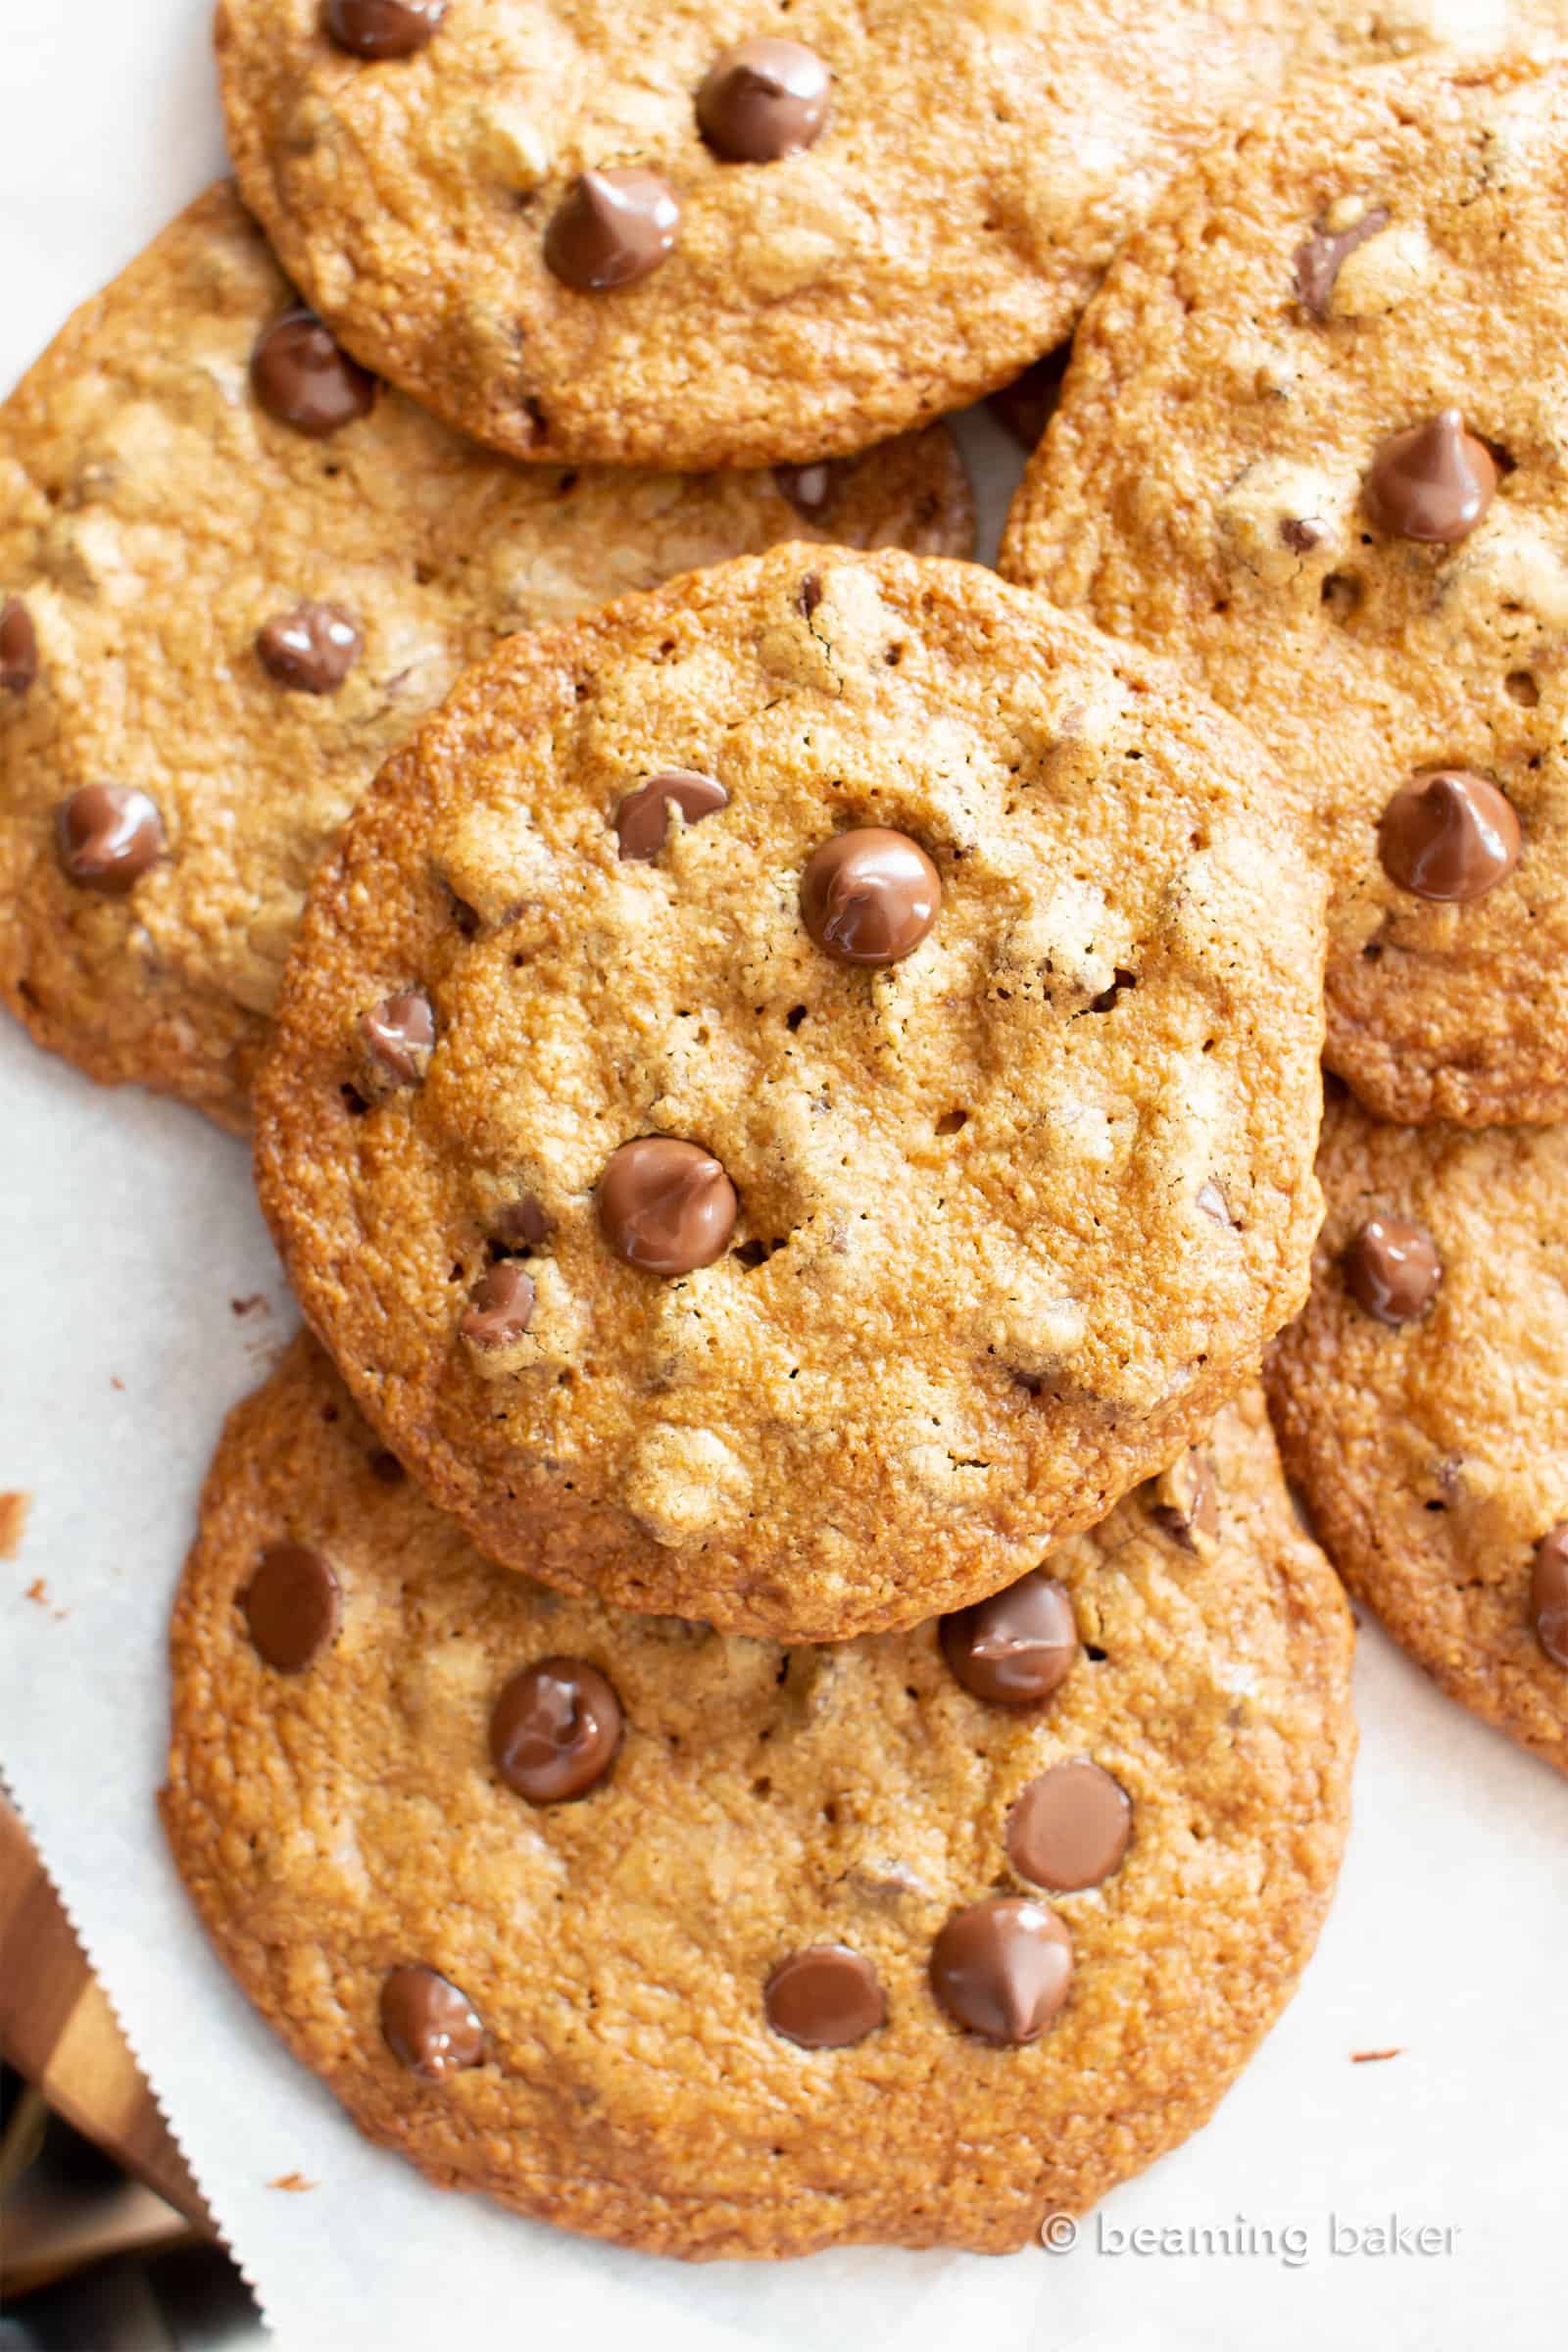 Thin Crispy Vegan Chocolate Chip Cookies (Gluten Free): deliciously thin vegan chocolate chip cookies with crunchy, crispy edges and a buttery chewy center. The BEST thin crispy chocolate chip cookies—that happen to be gluten free and dairy free! #Vegan #GlutenFree #ThinCrispy #ChocolateChip #Cookies | Recipe at BeamingBaker.com